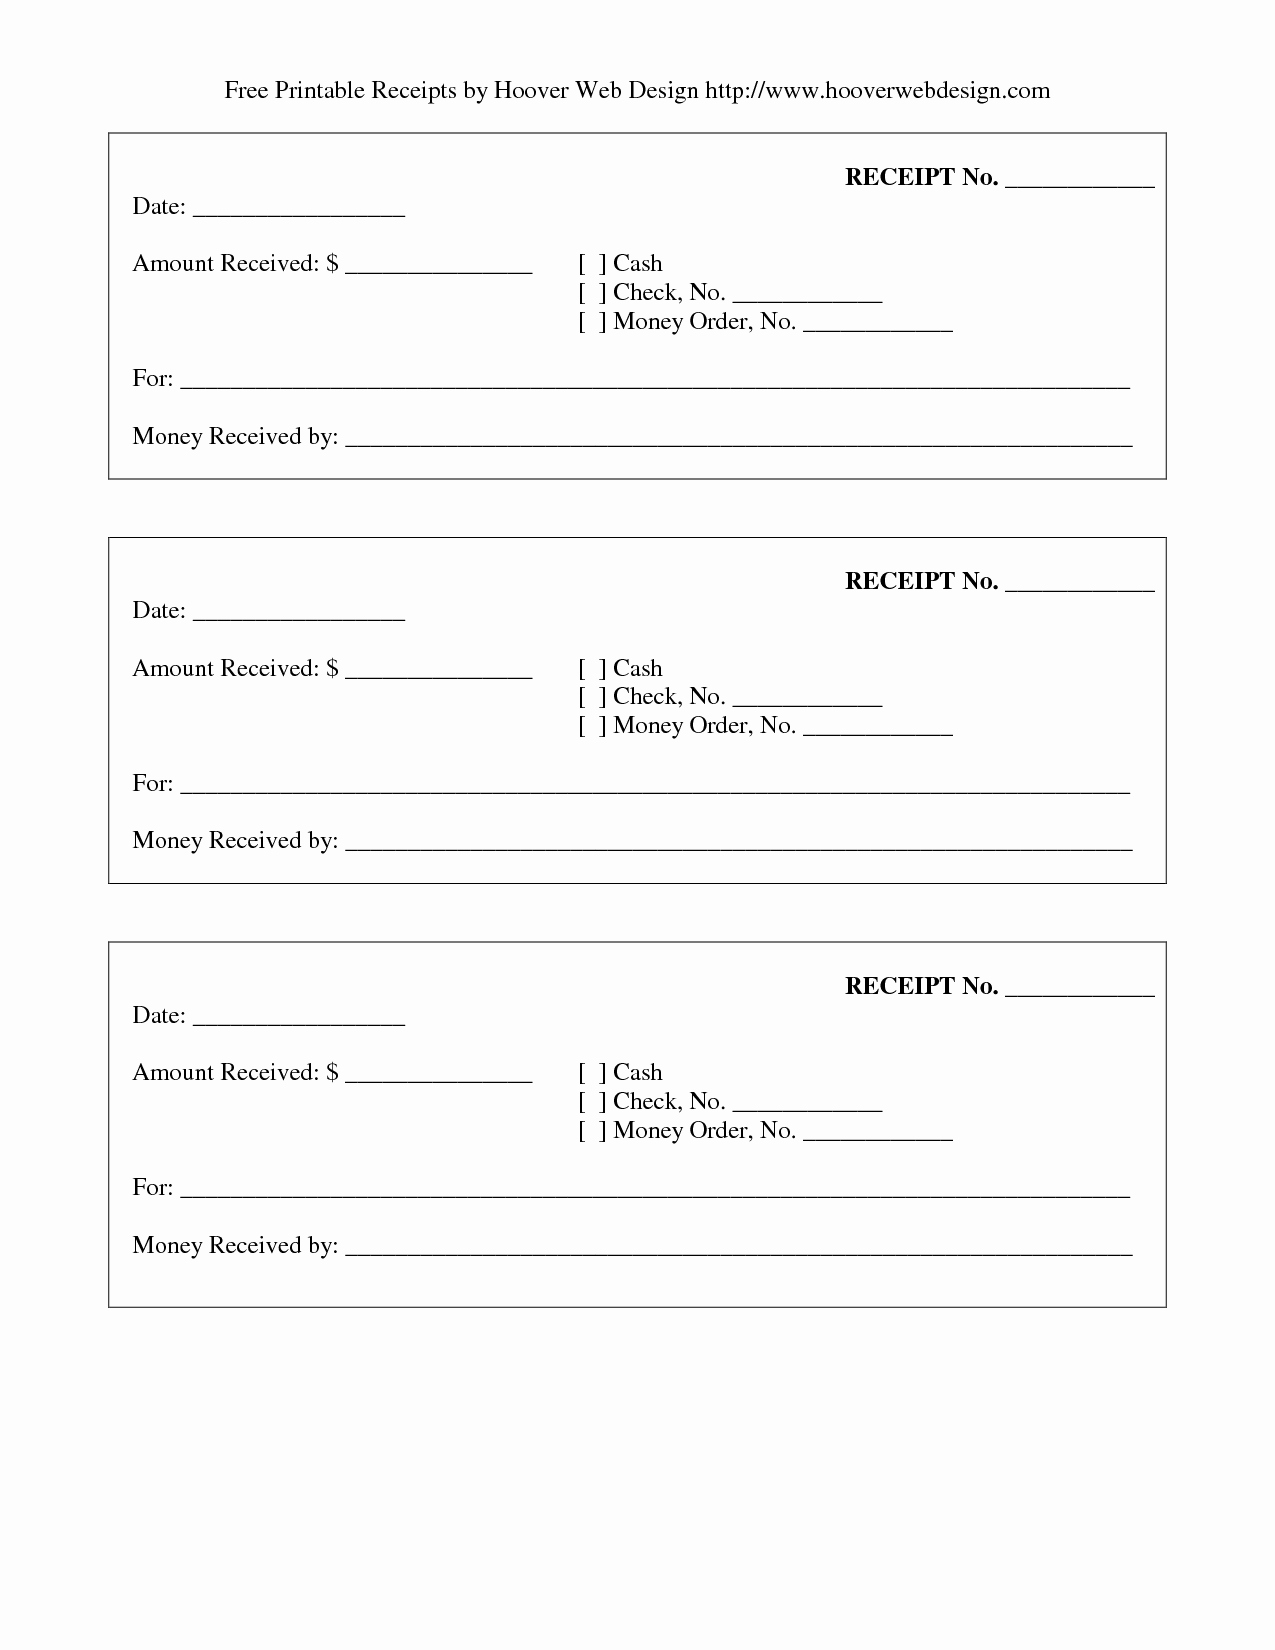 Receipt Template Free Printable Lovely 11 Best Of Free Printable Payment Receipt form